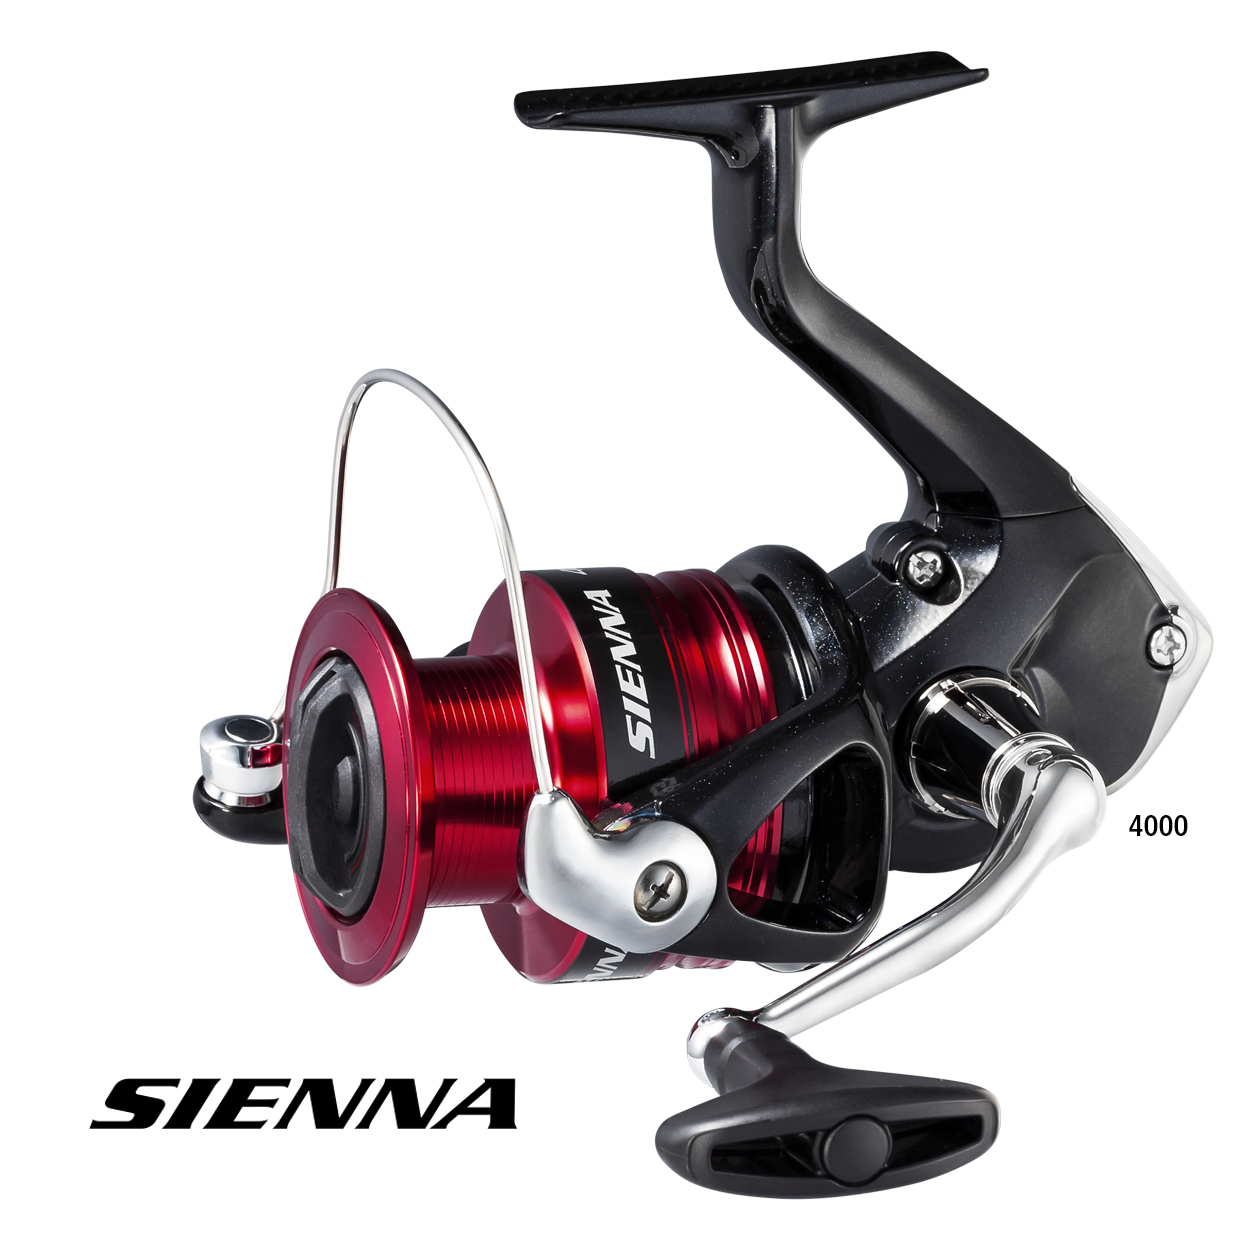 Shimano Sienna FG Spin Reels - Compleat Angler Ringwood